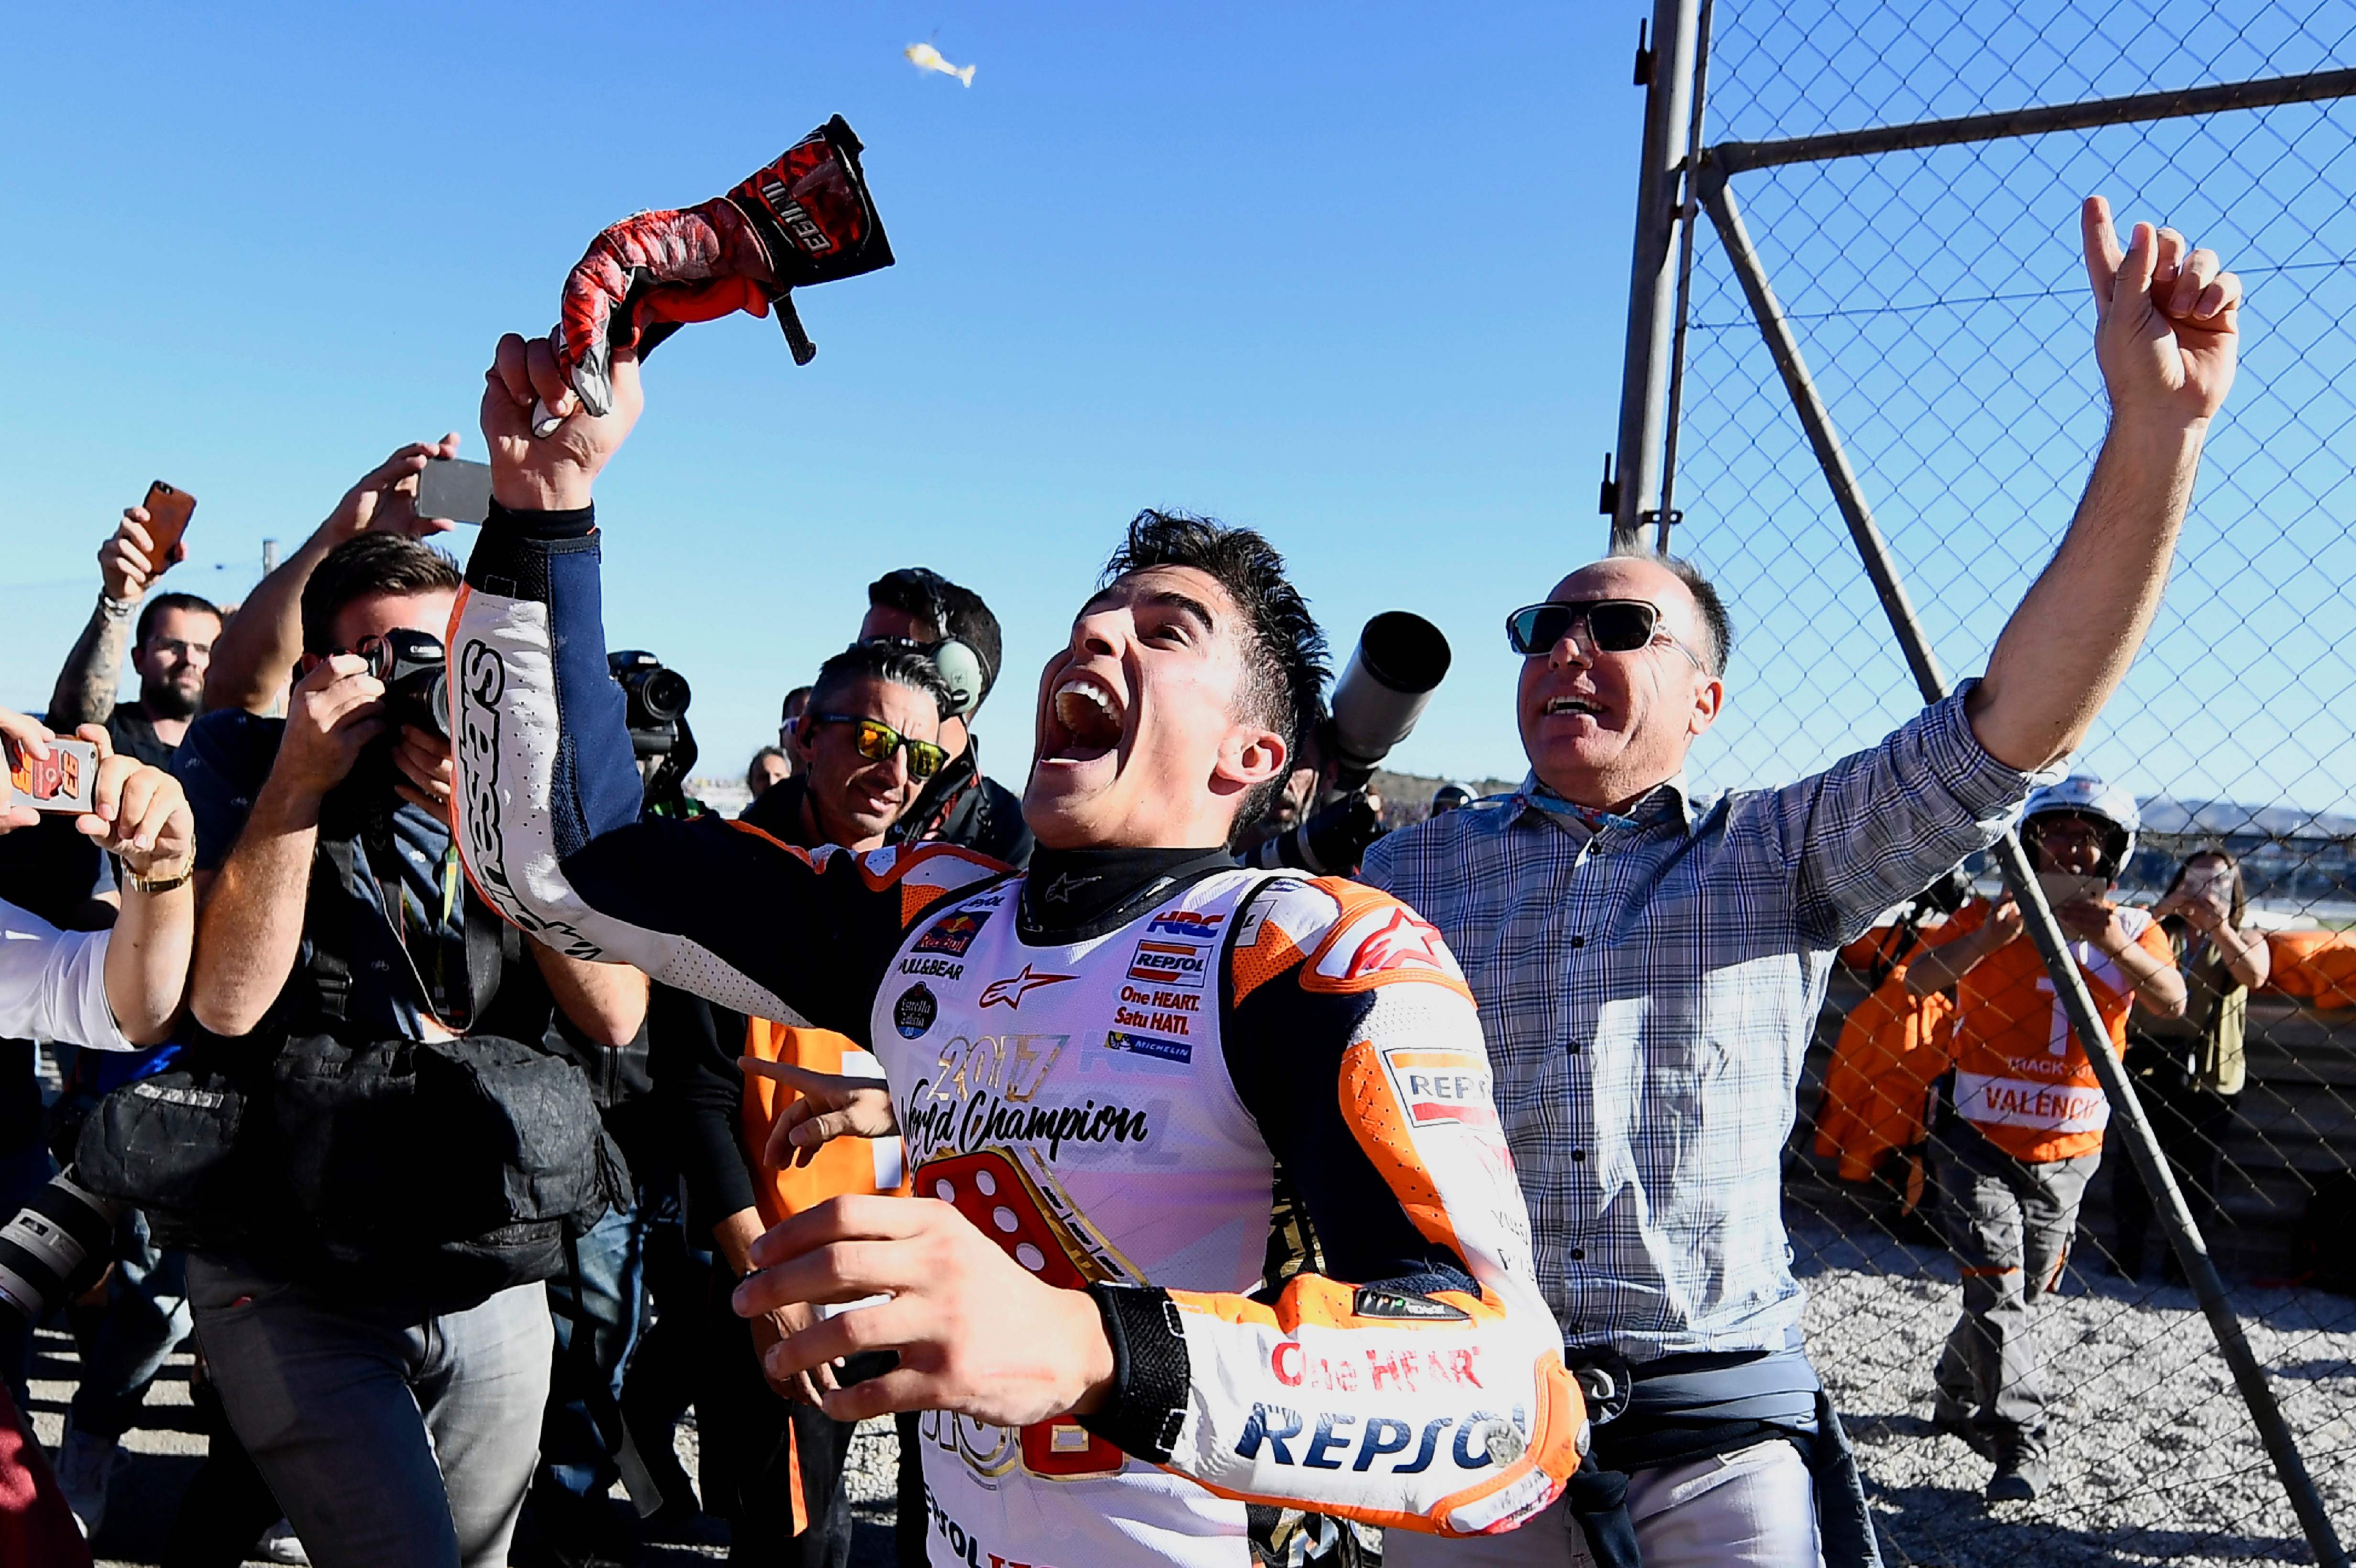 Spanish rider Marc Marquez celebrates after the MotoGP race of the Valencia Grand Prix. Photo: AFP